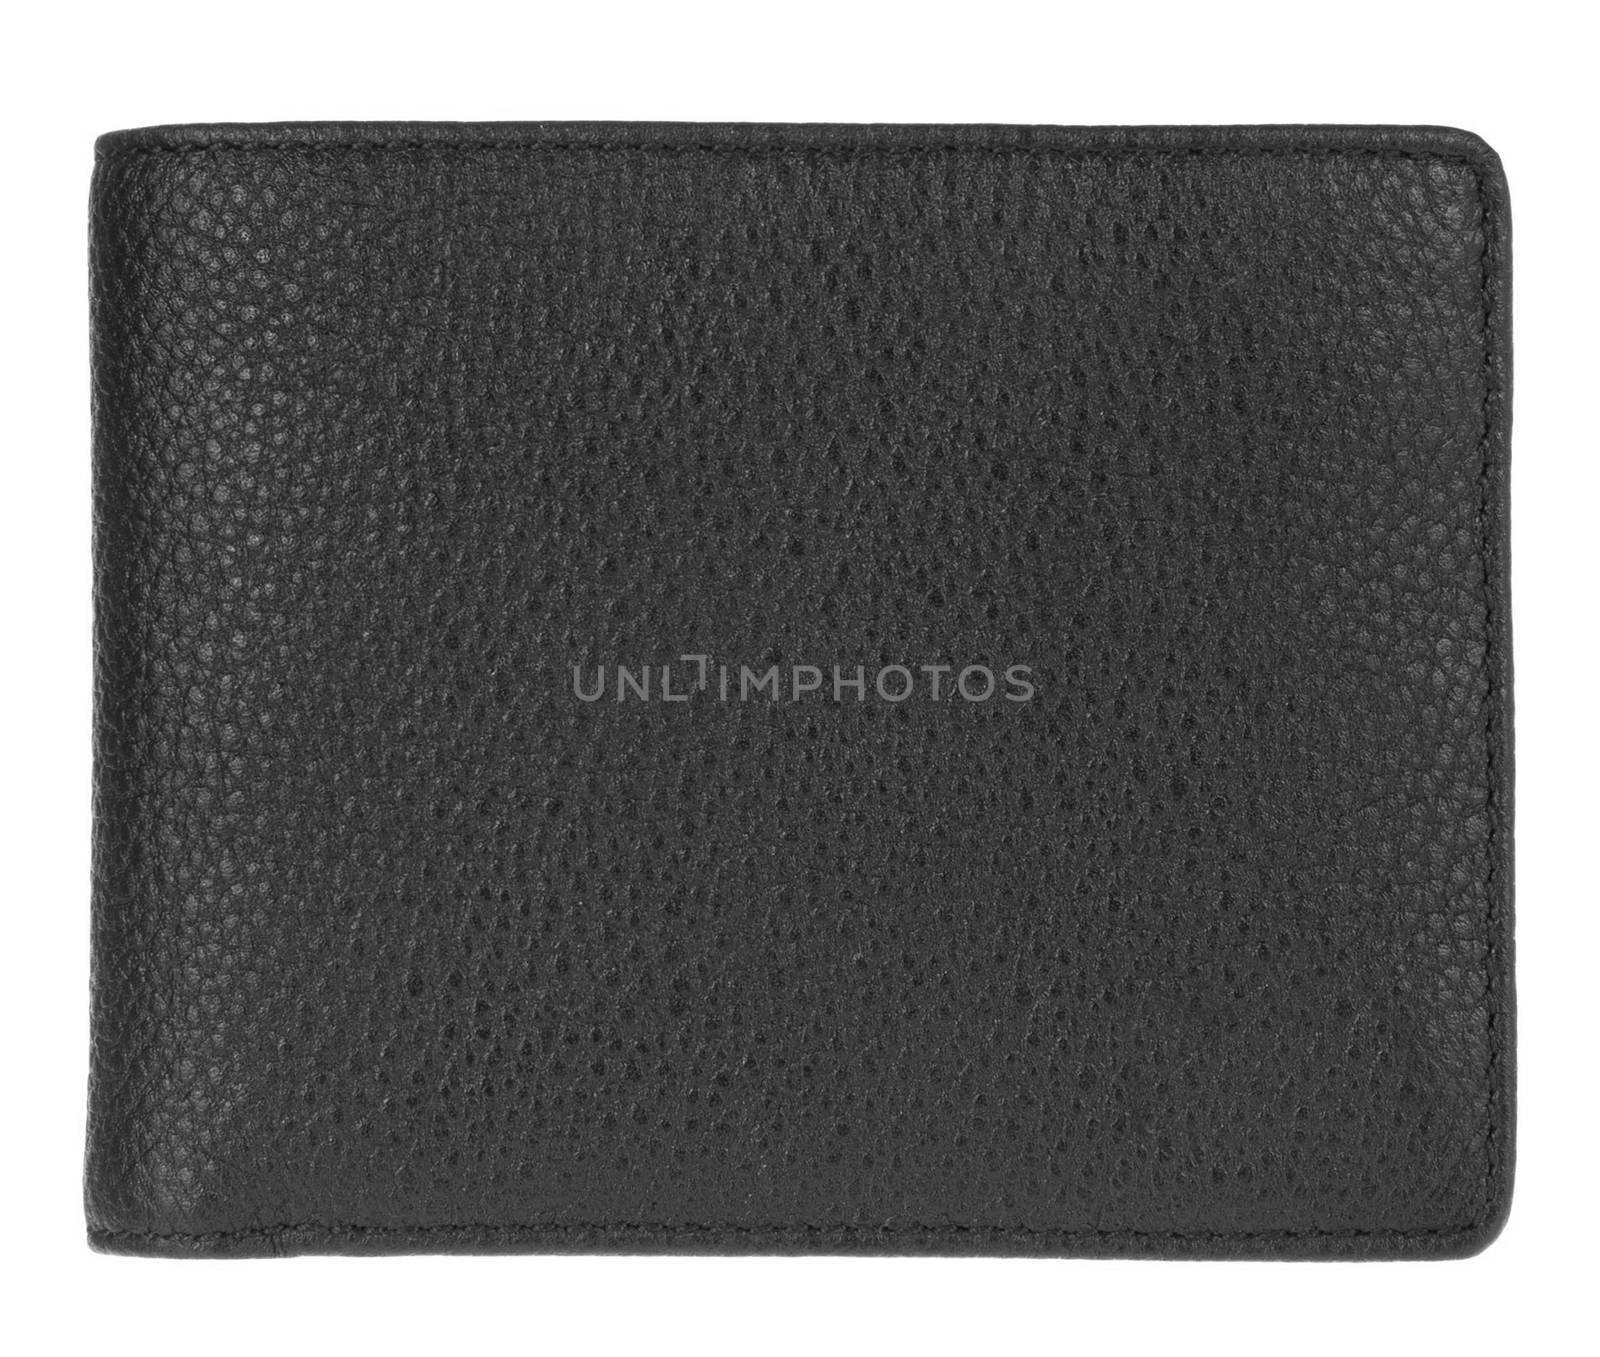 black wallet isolated on white background